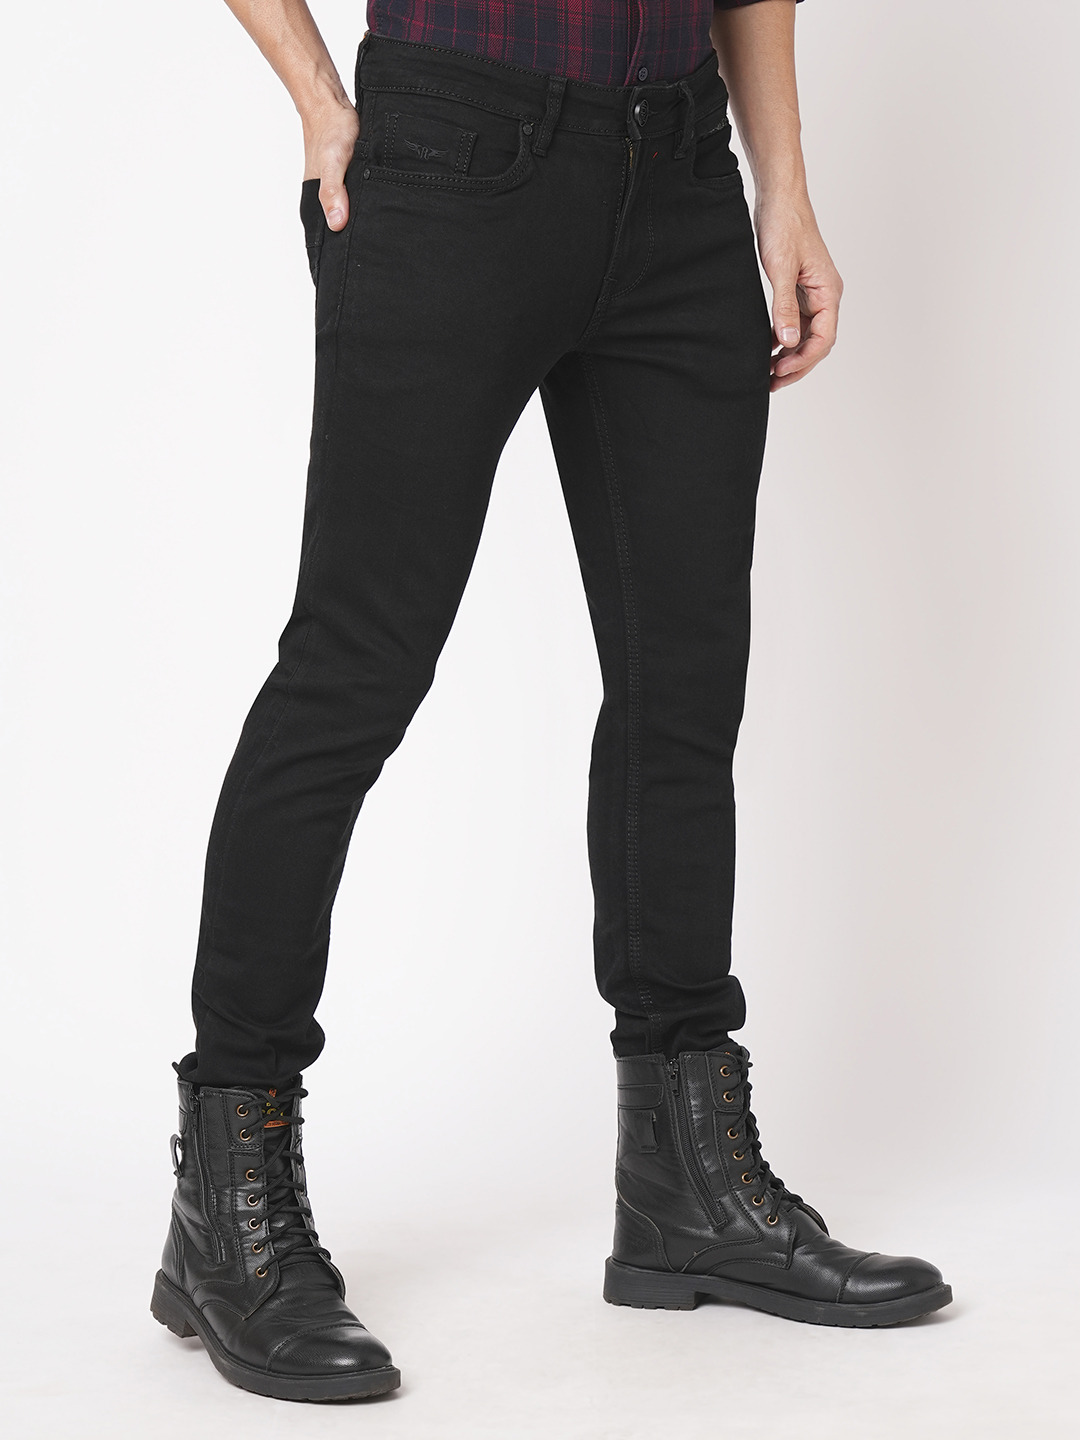 BLACK 5 POCKET MID-RISE NARROW TAPERED FIT JEANS (BILLY FIT)